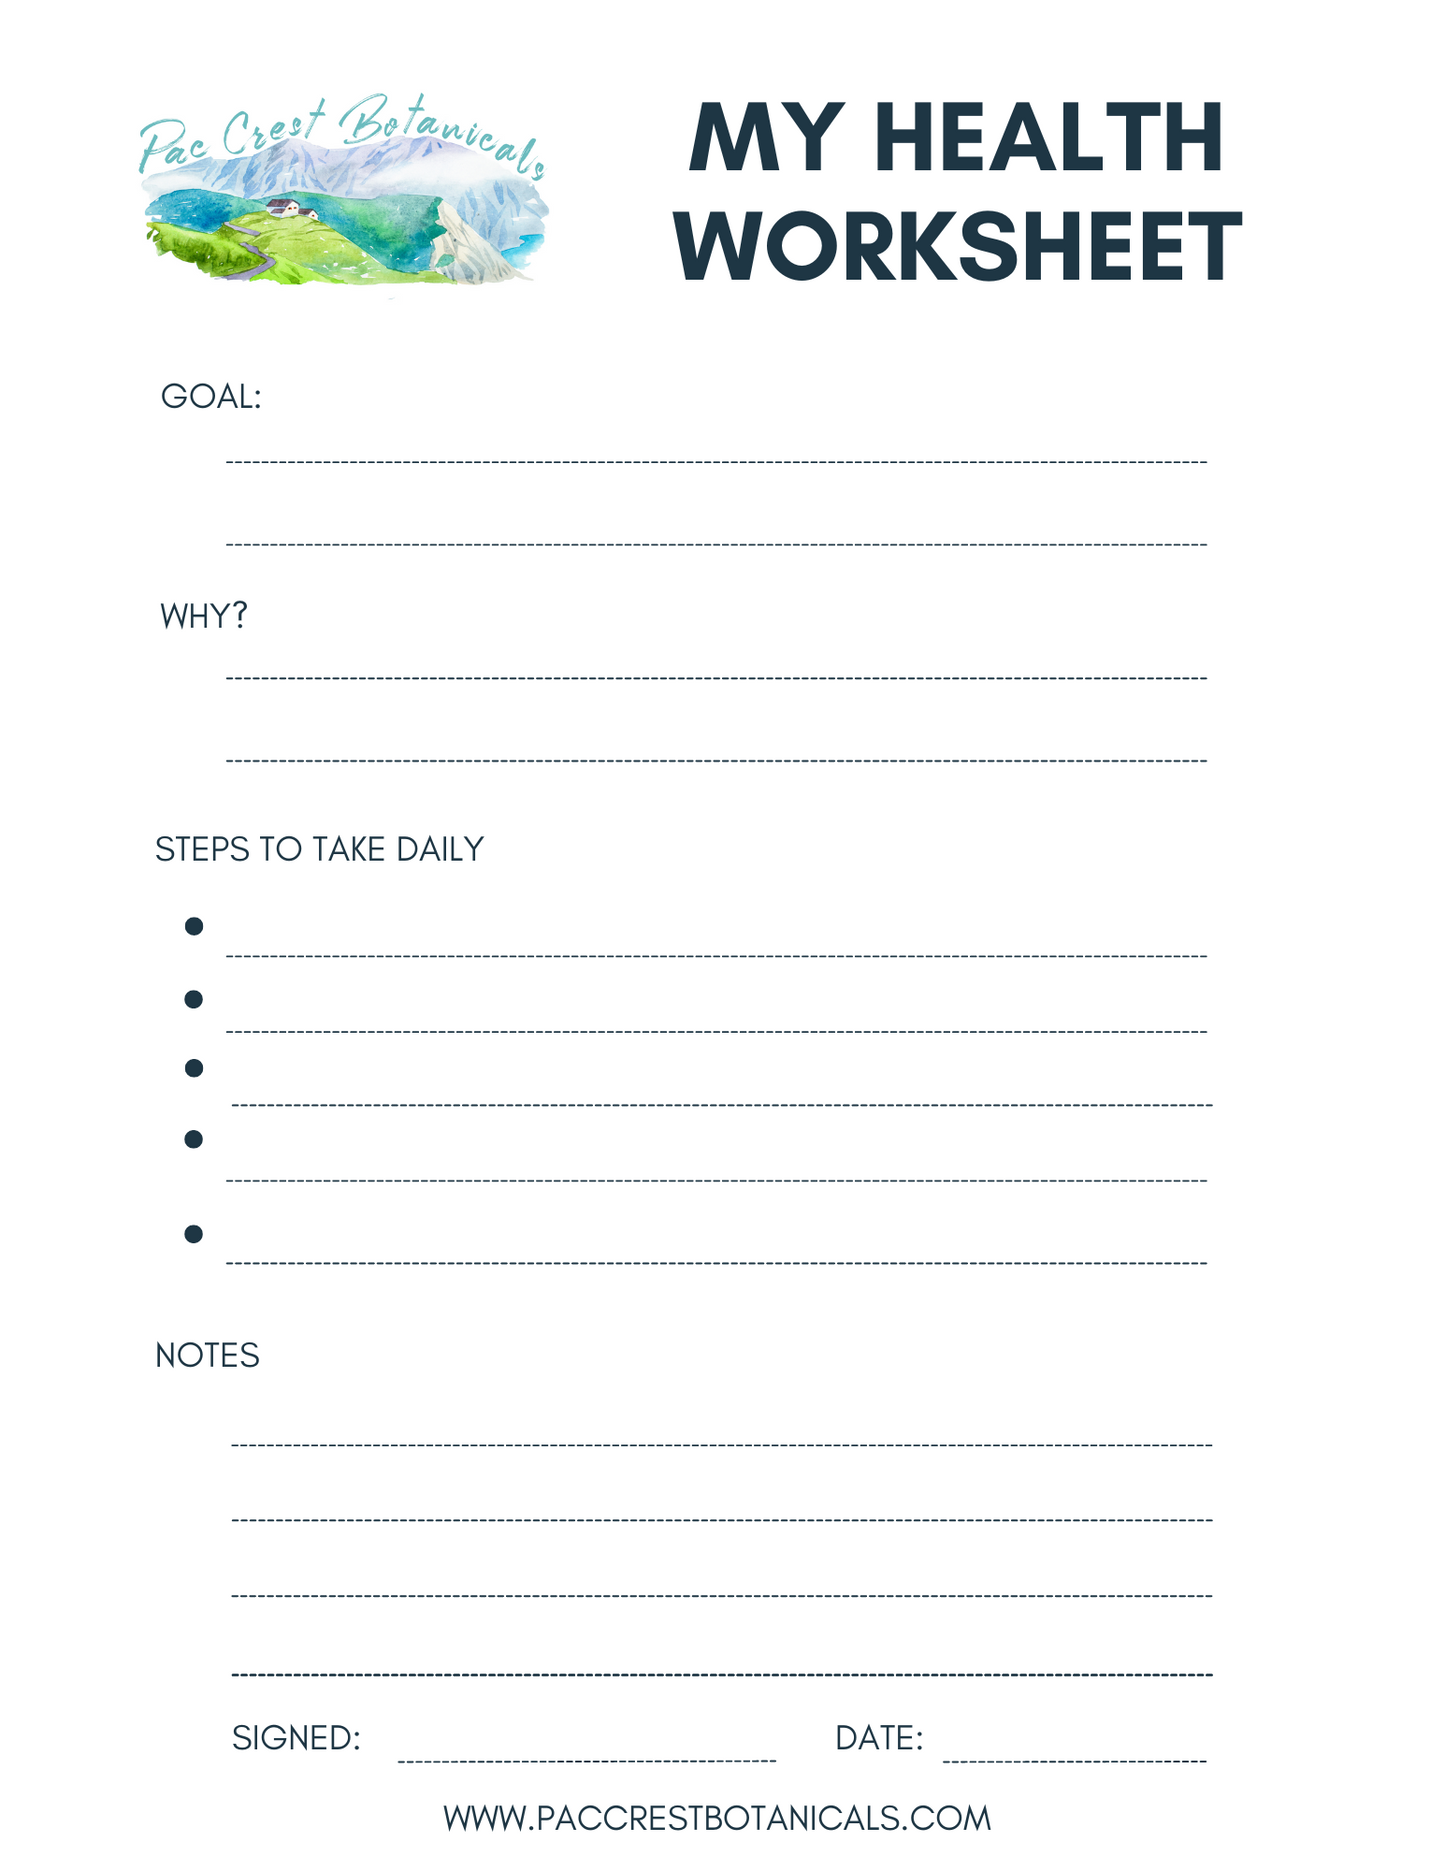 Taking Control of Your Health- Worksheet (FREE)